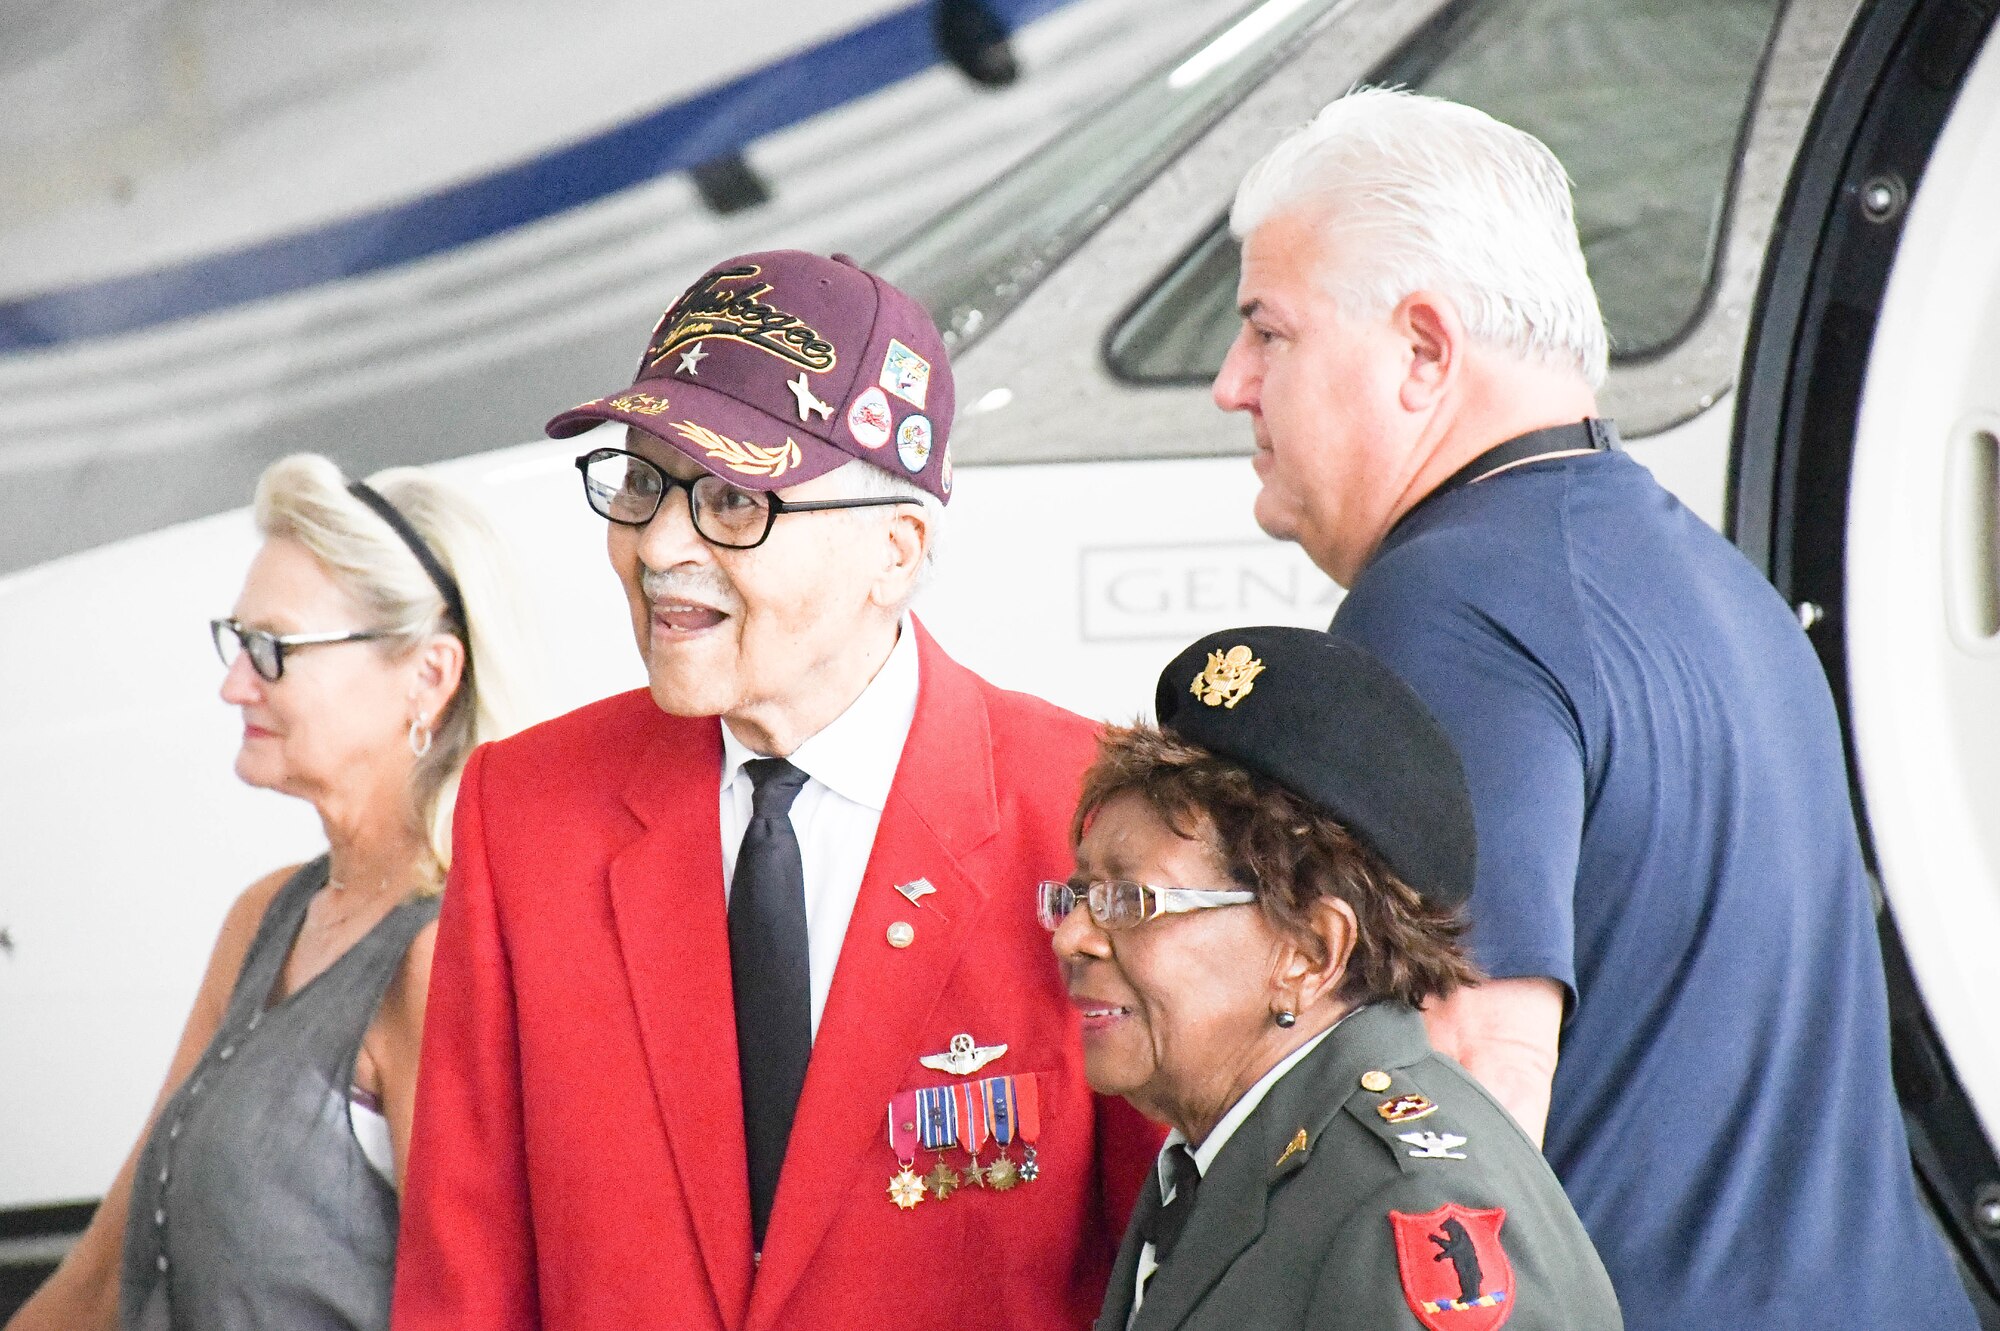 Tuskegee Airman retired Brig. Gen. Charles E. McGee and retired U.S. Army Col. Cloe Degraffenreid deplane at the Atlantic terminal at Charles B. Wheeler Downtown Airport.